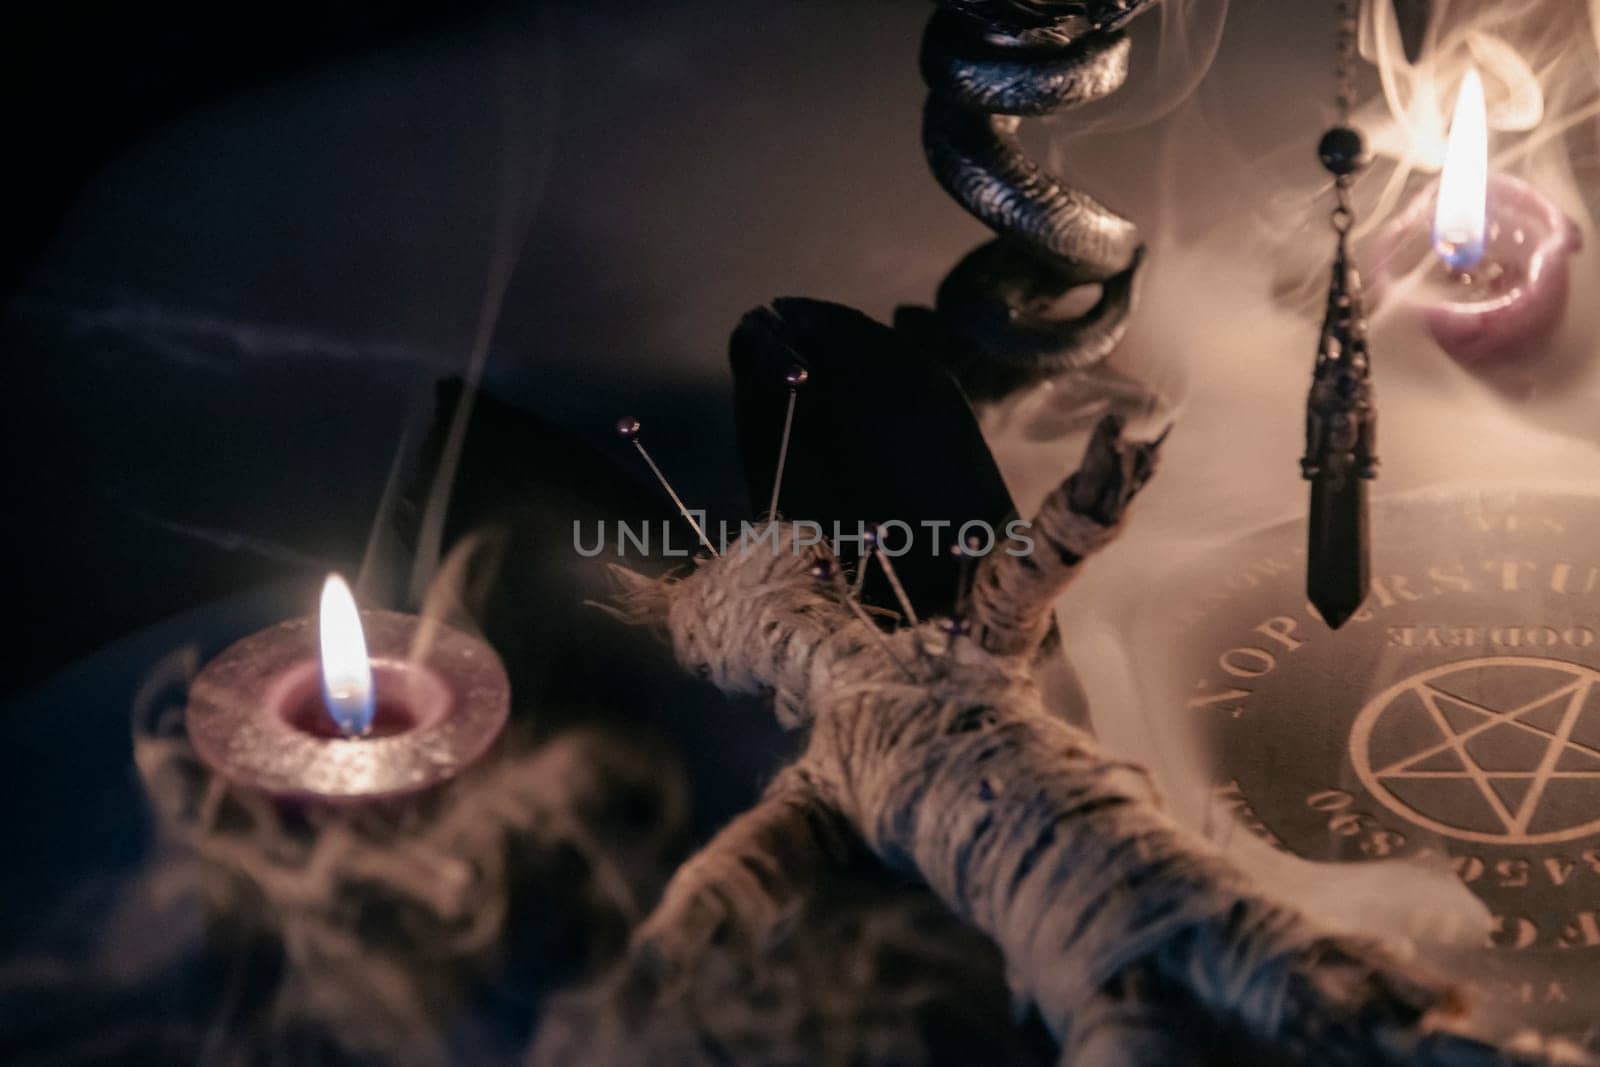 A haunting occult setup featuring a pendulum, mystical symbols, candles, a voodoo doll, and a ritual goblet amidst swirling smoke